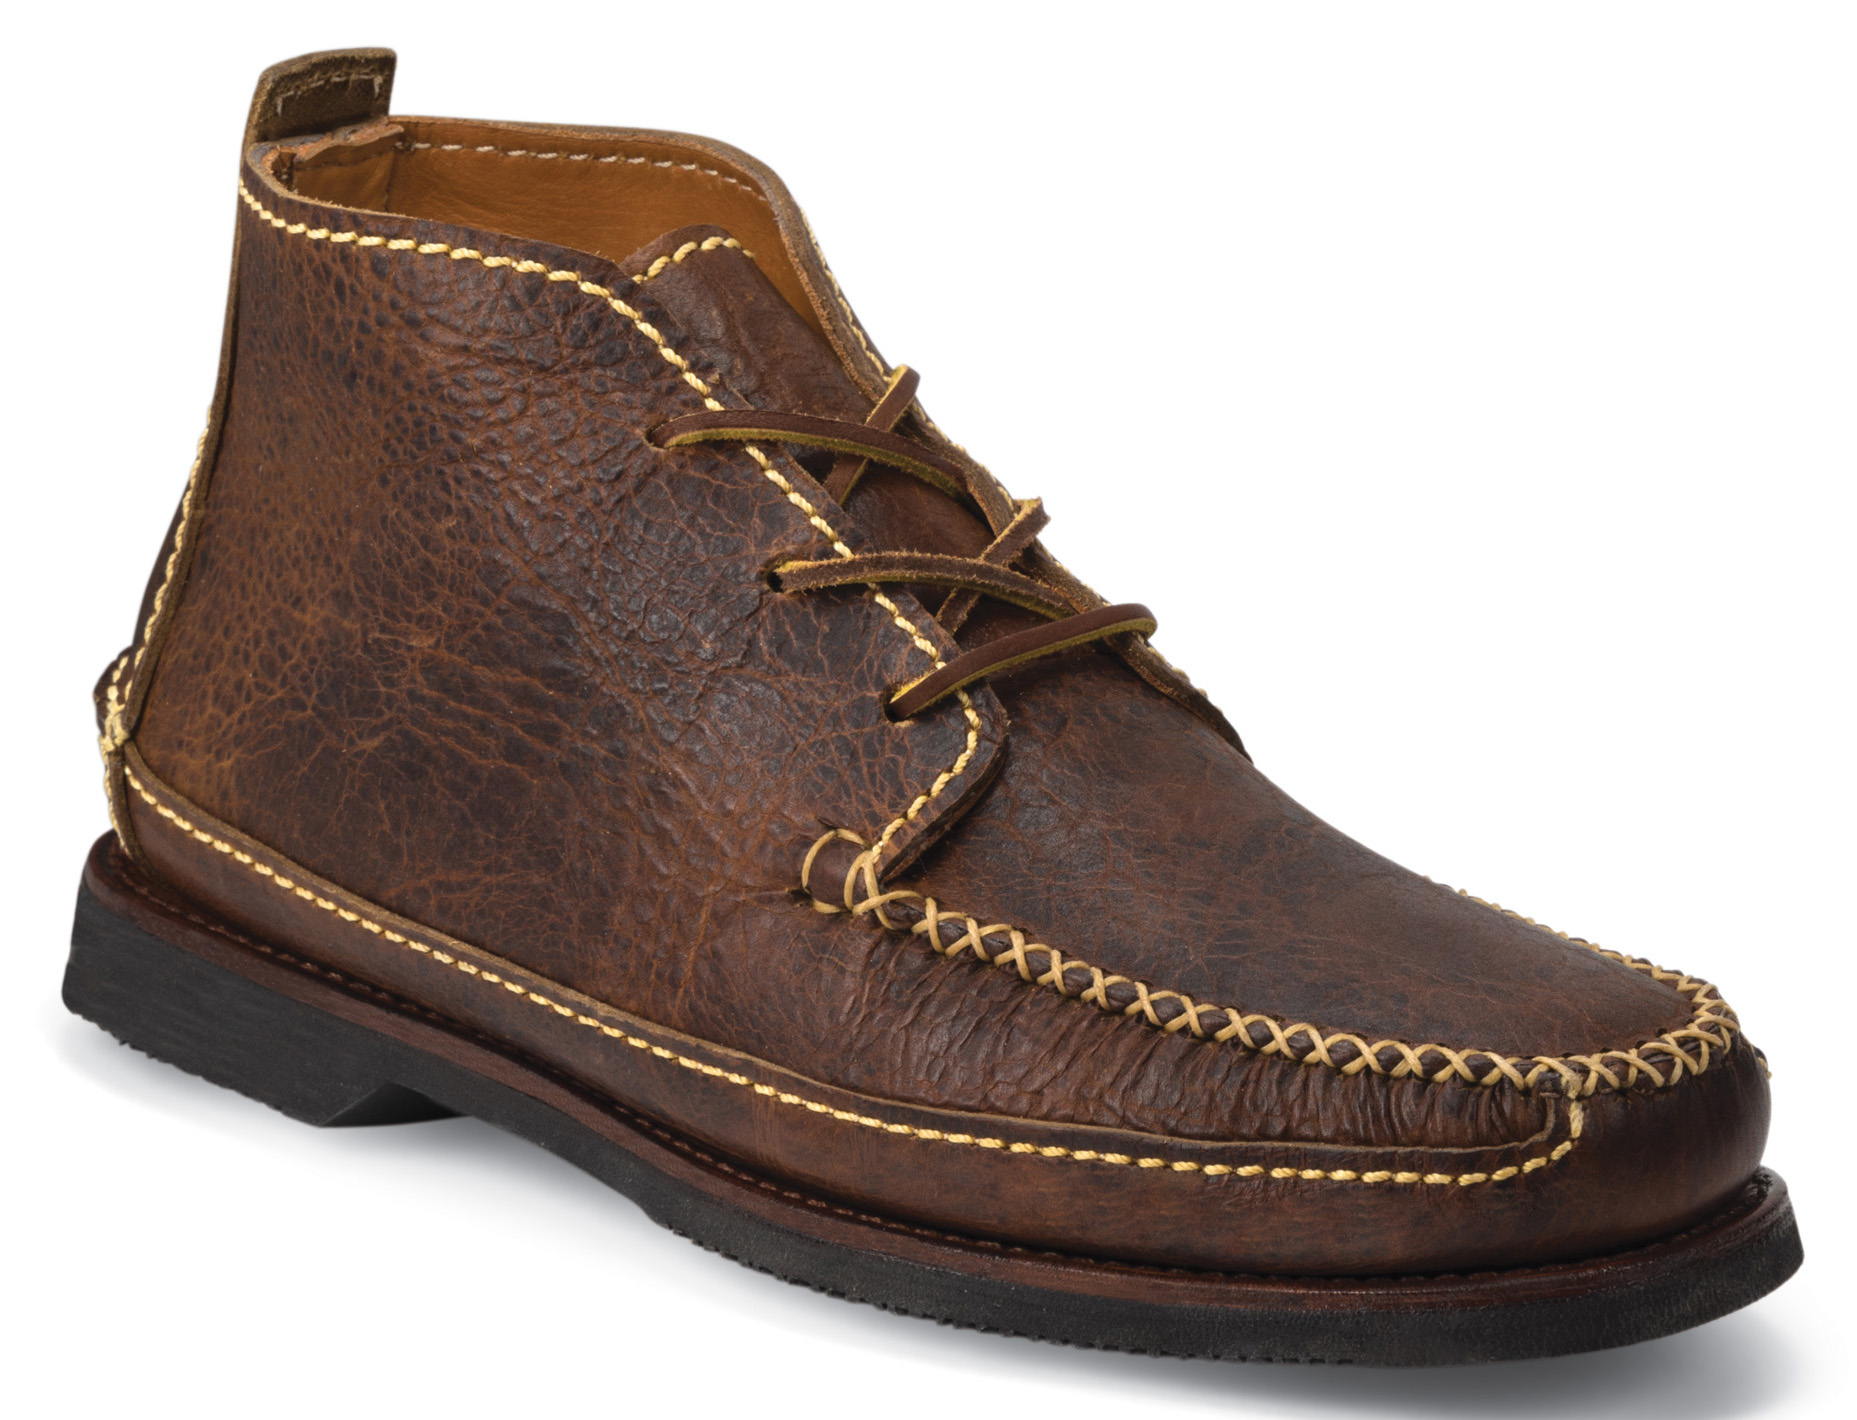 Chippewa Men's Rugged American Bison Chukka Boots - Country Outfitter